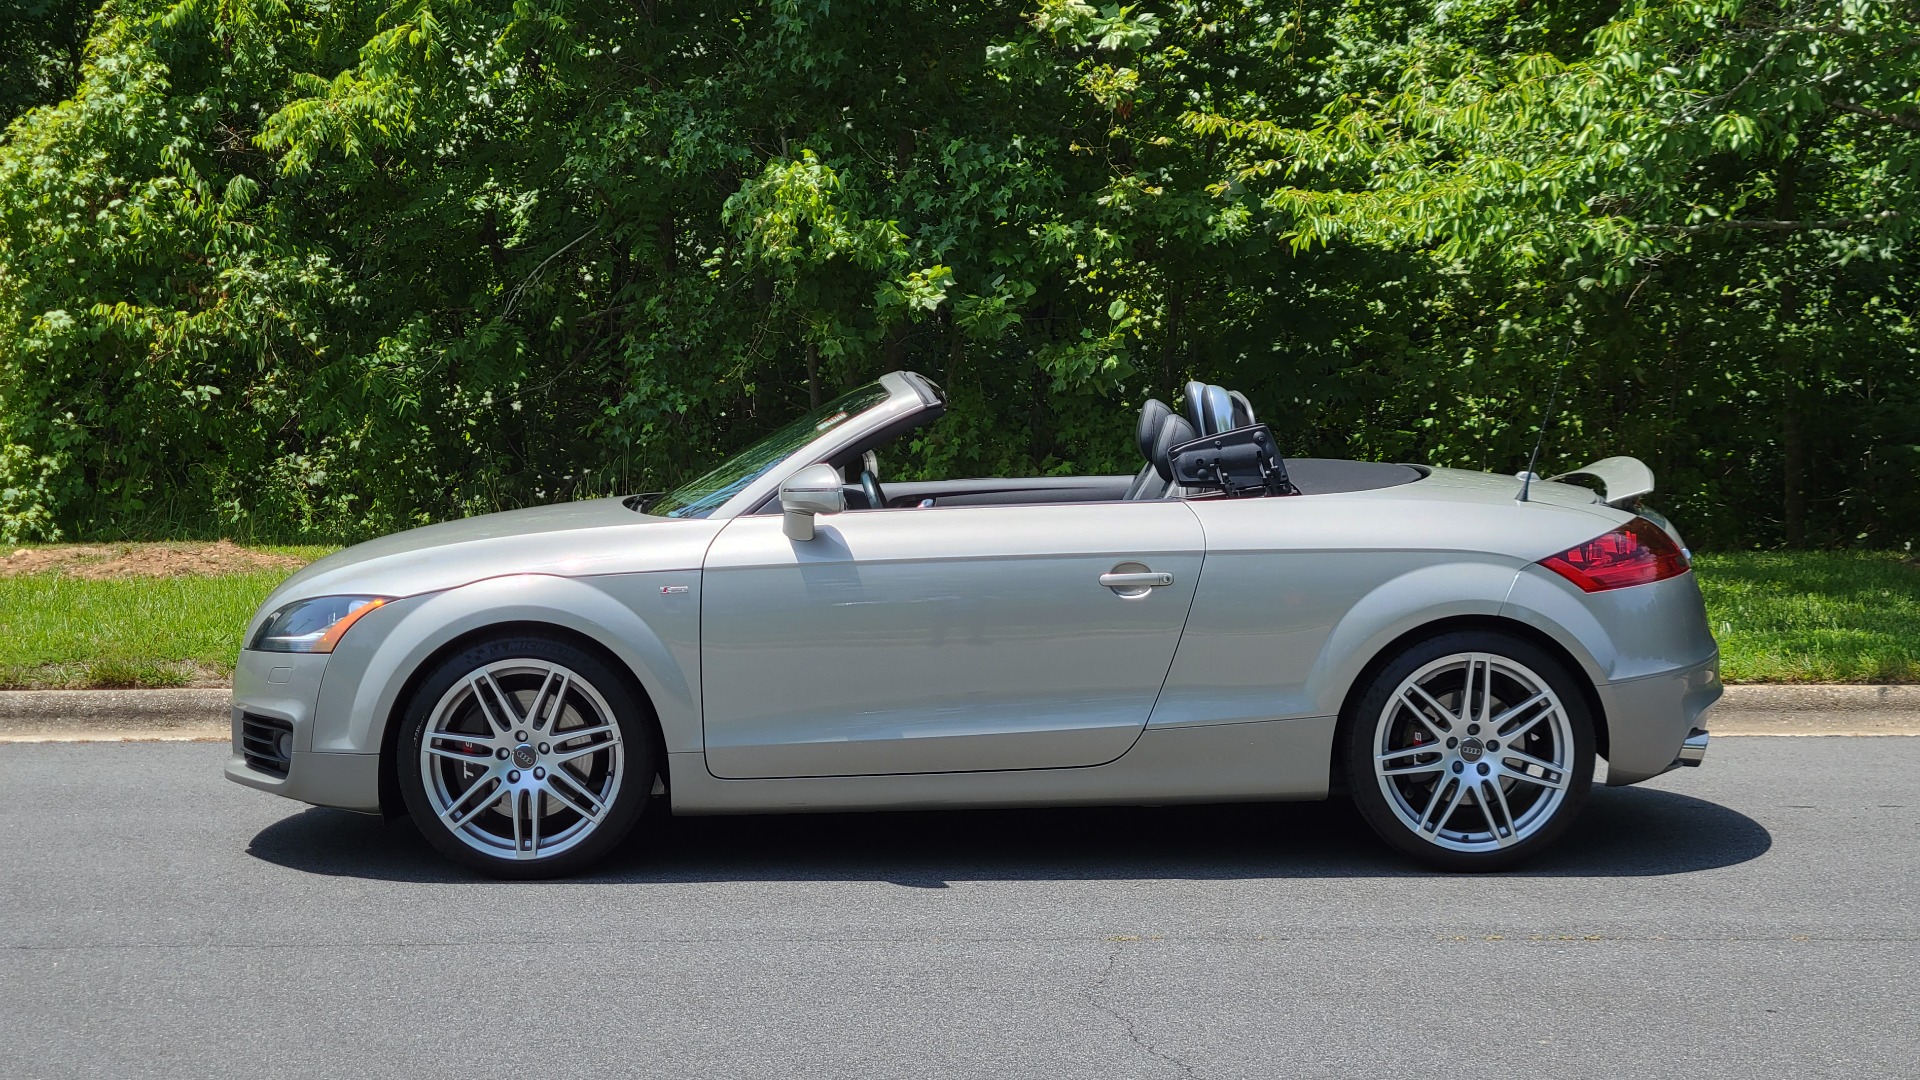 Used 2008 Audi TT 3.2L CONVERTIBLE / MANUAL / 19IN WHEELS / LOW MILES for sale Sold at Formula Imports in Charlotte NC 28227 15